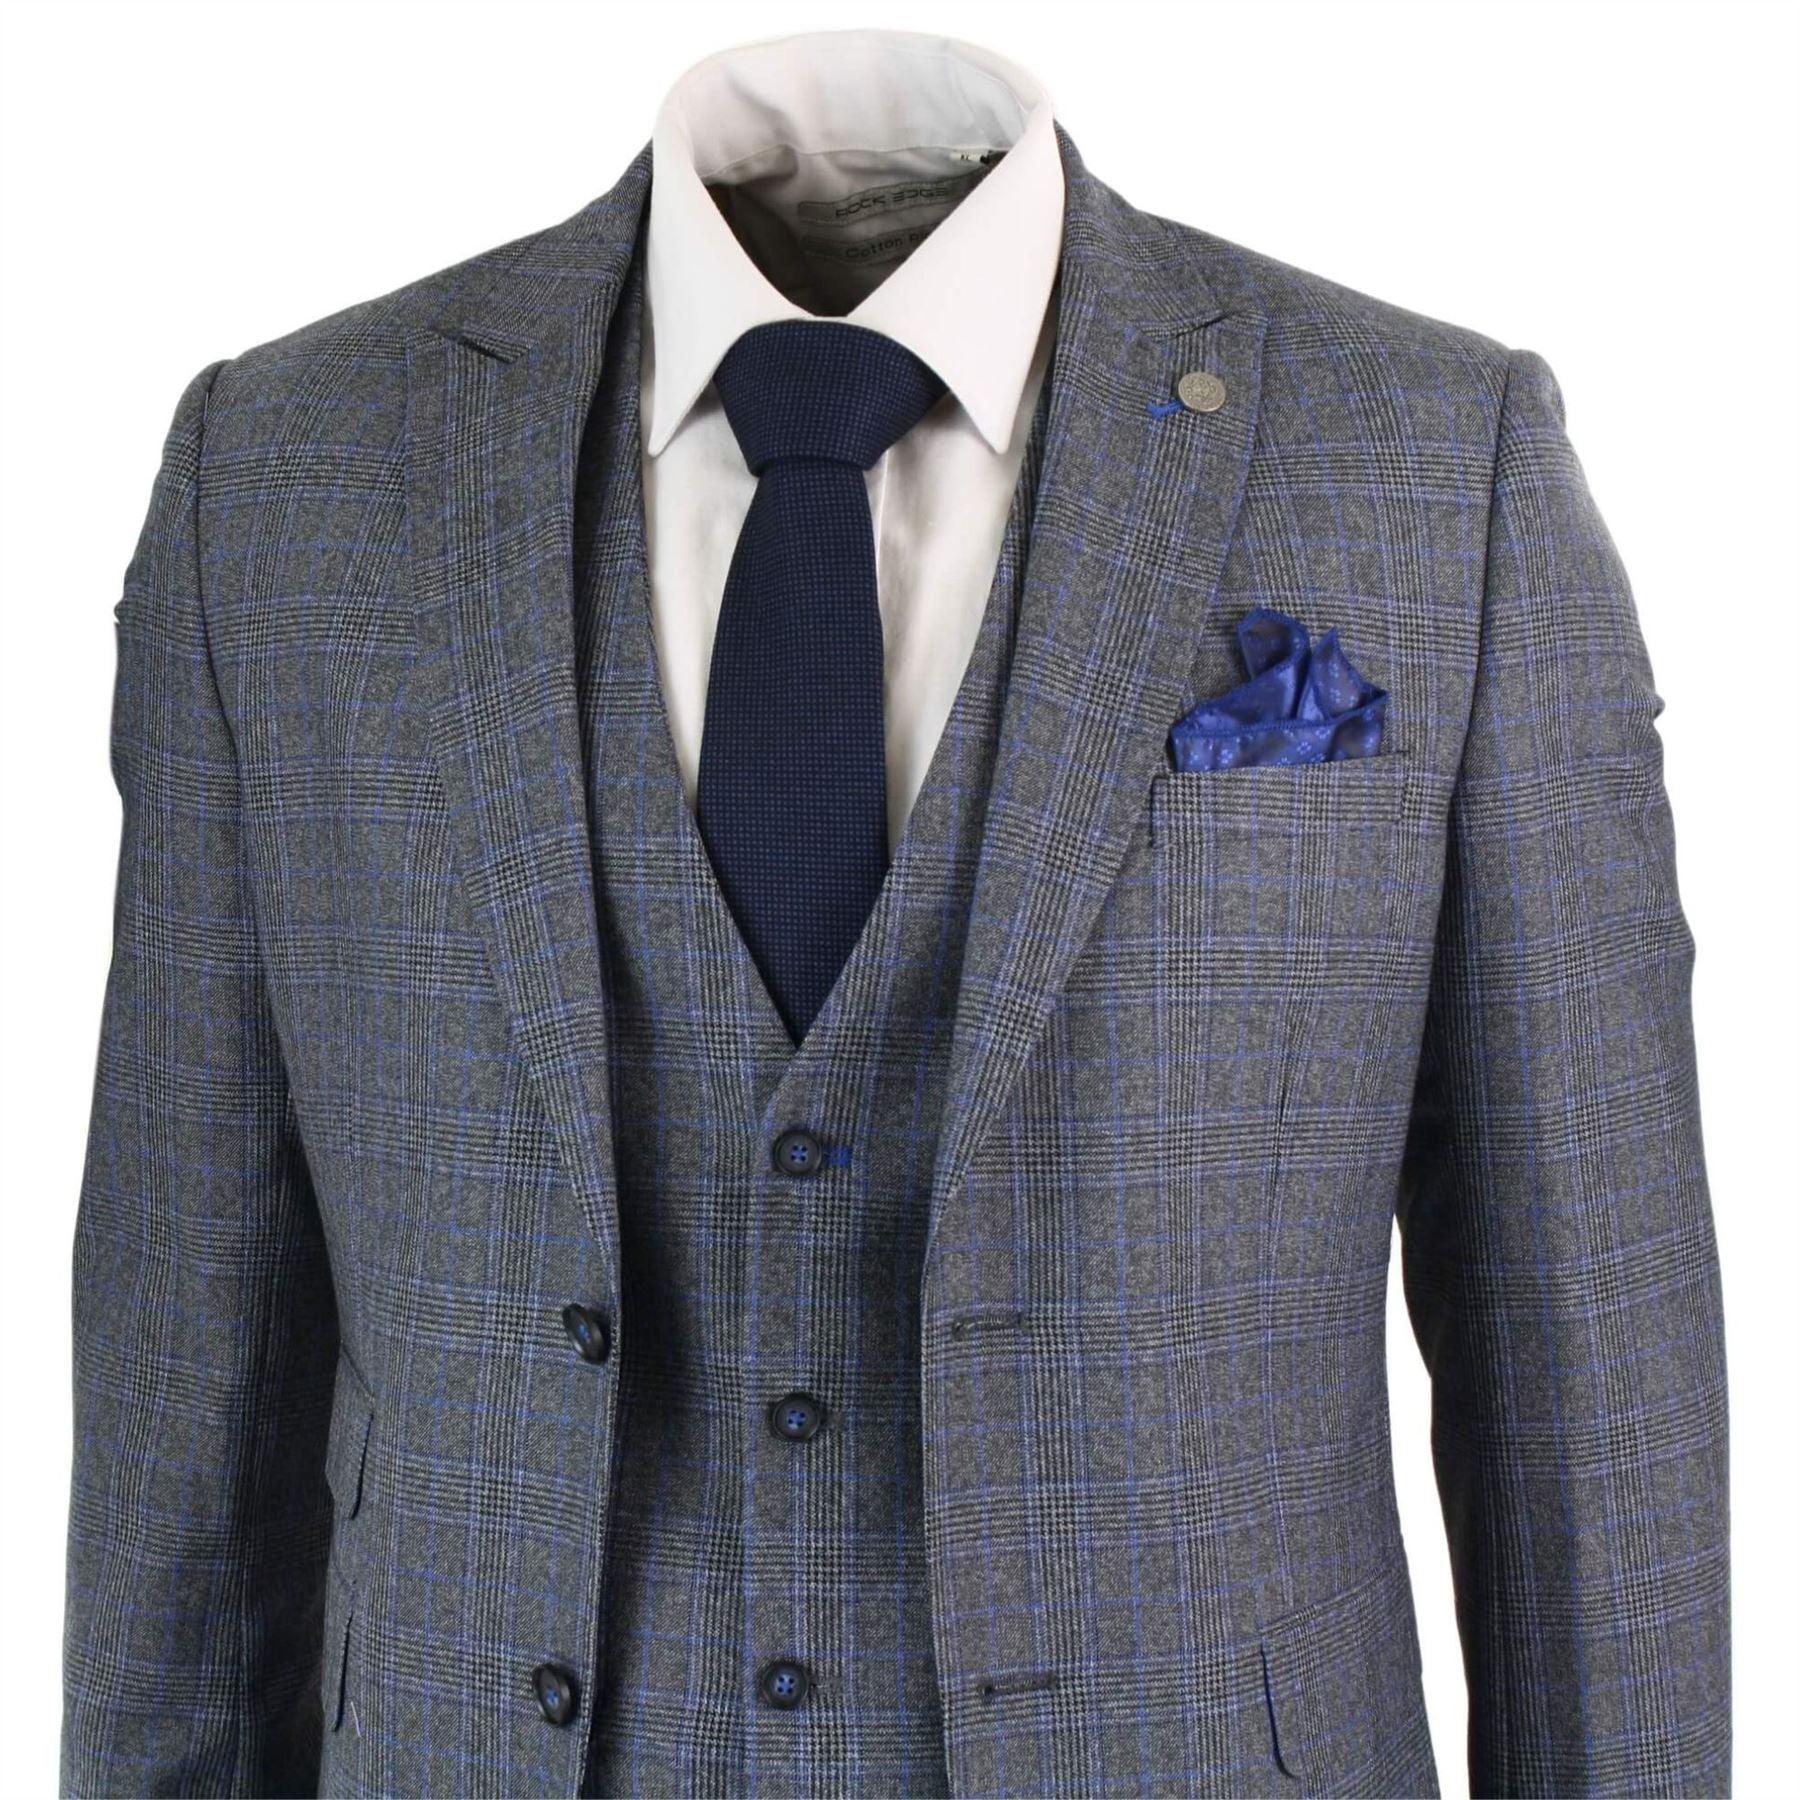 Mens 3 Piece Tailored Fit Prince Of Wales Check Grey Blue Tweed Suit Vintage Retro - Knighthood Store